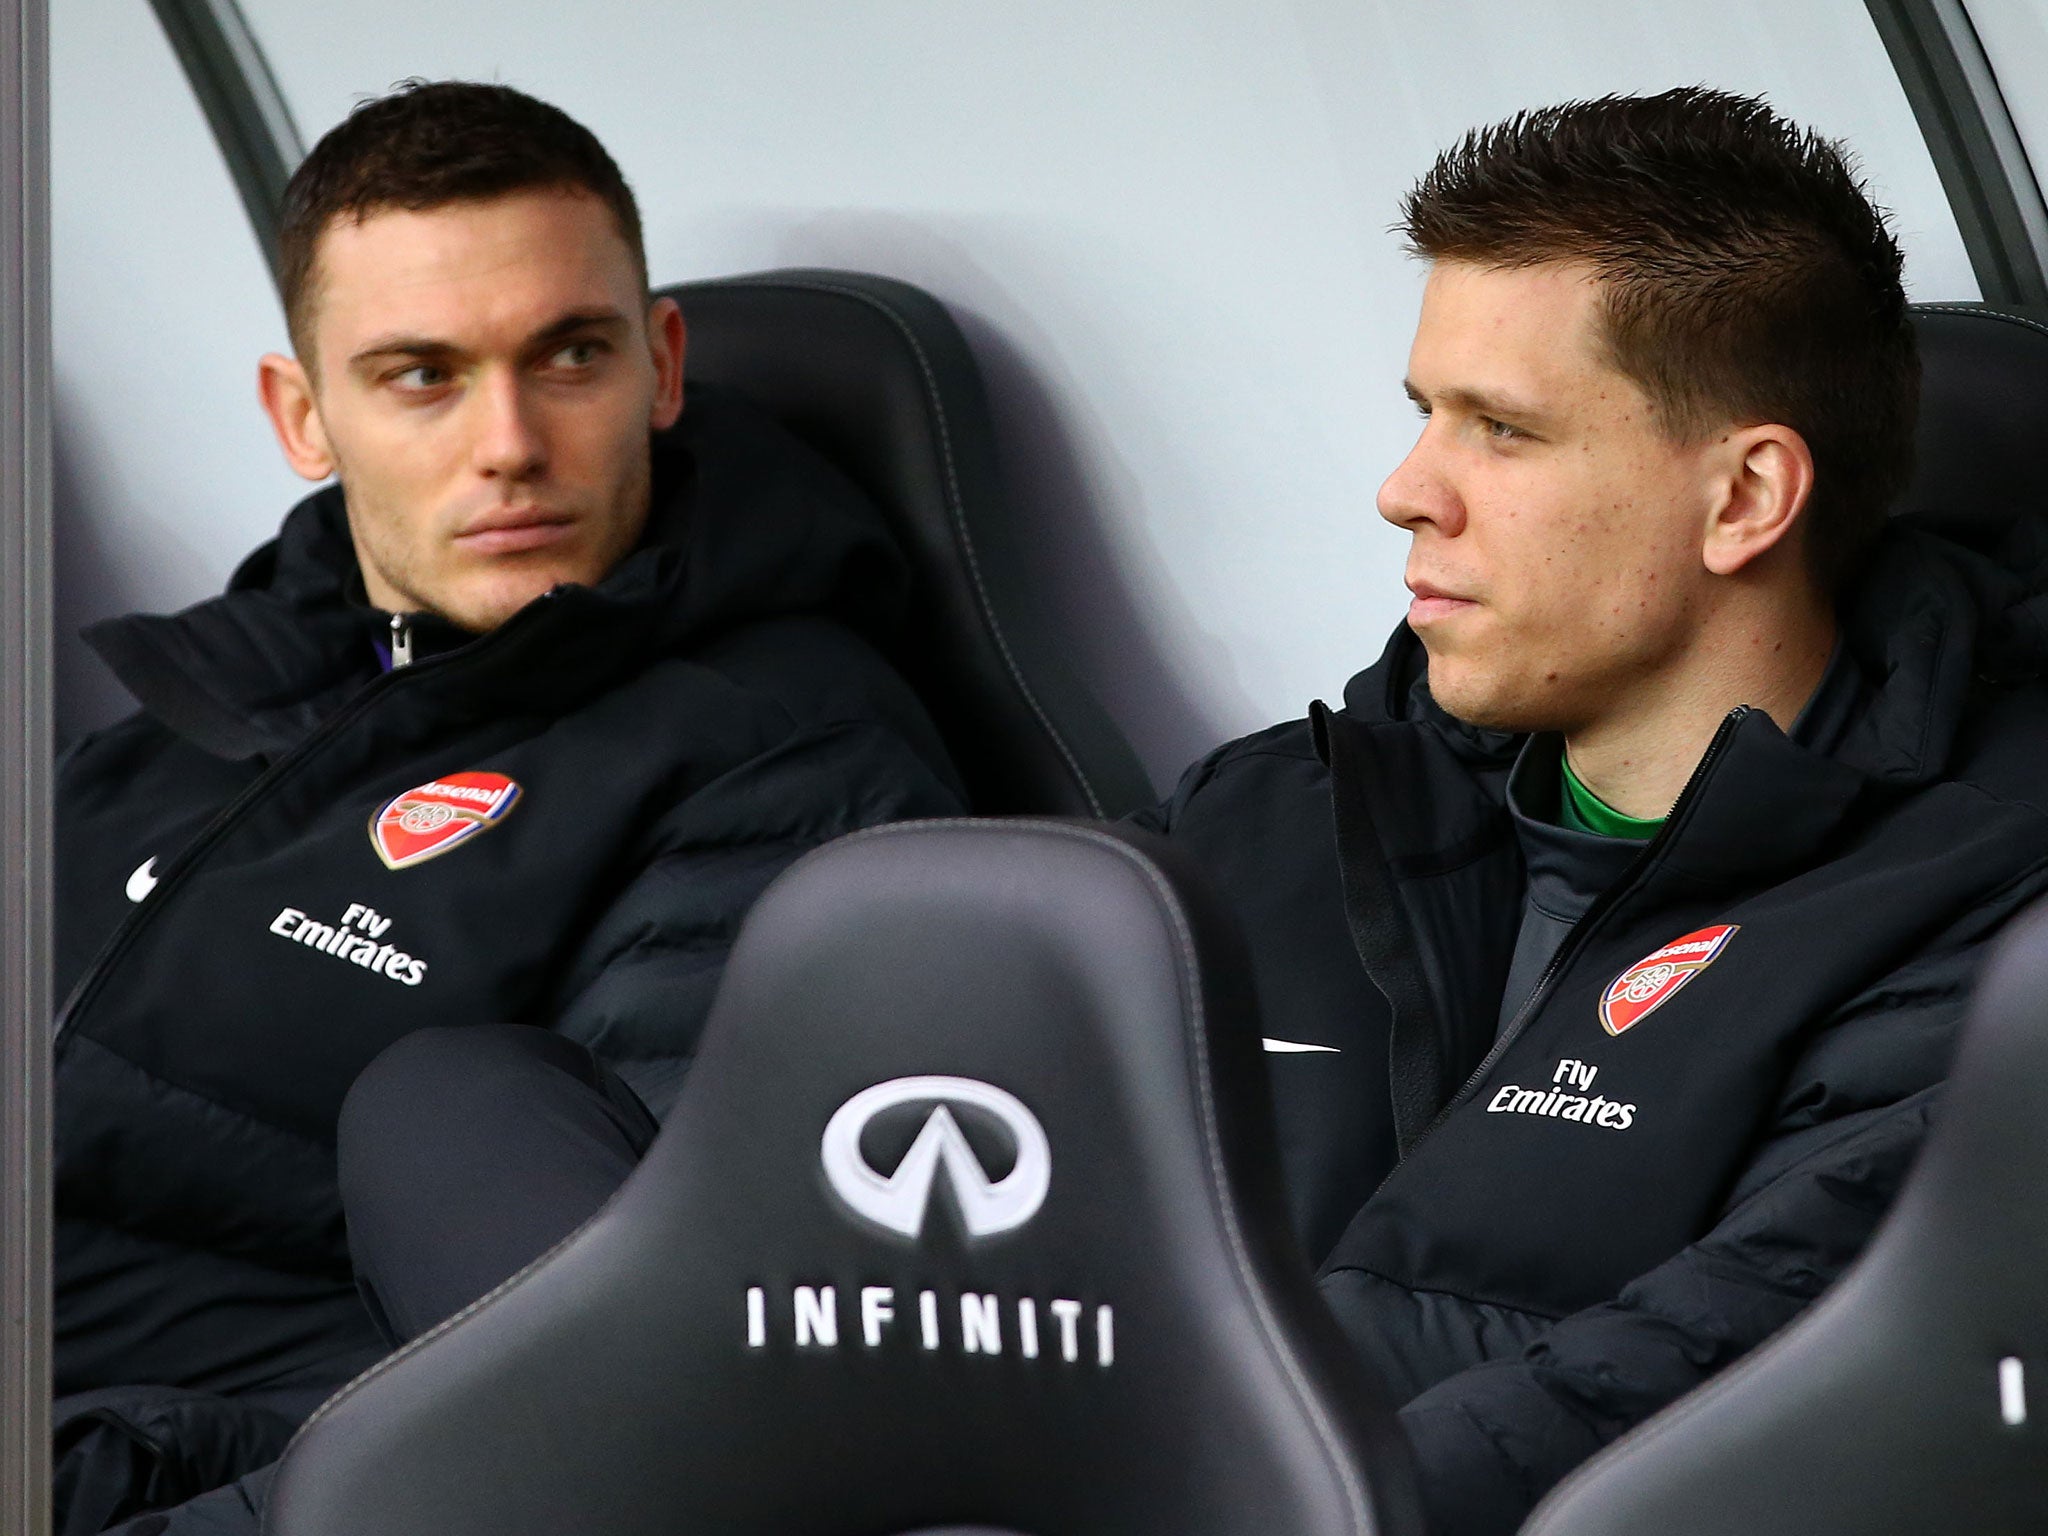 Thomas Vermaelen (left) has only started one Premier League match this season